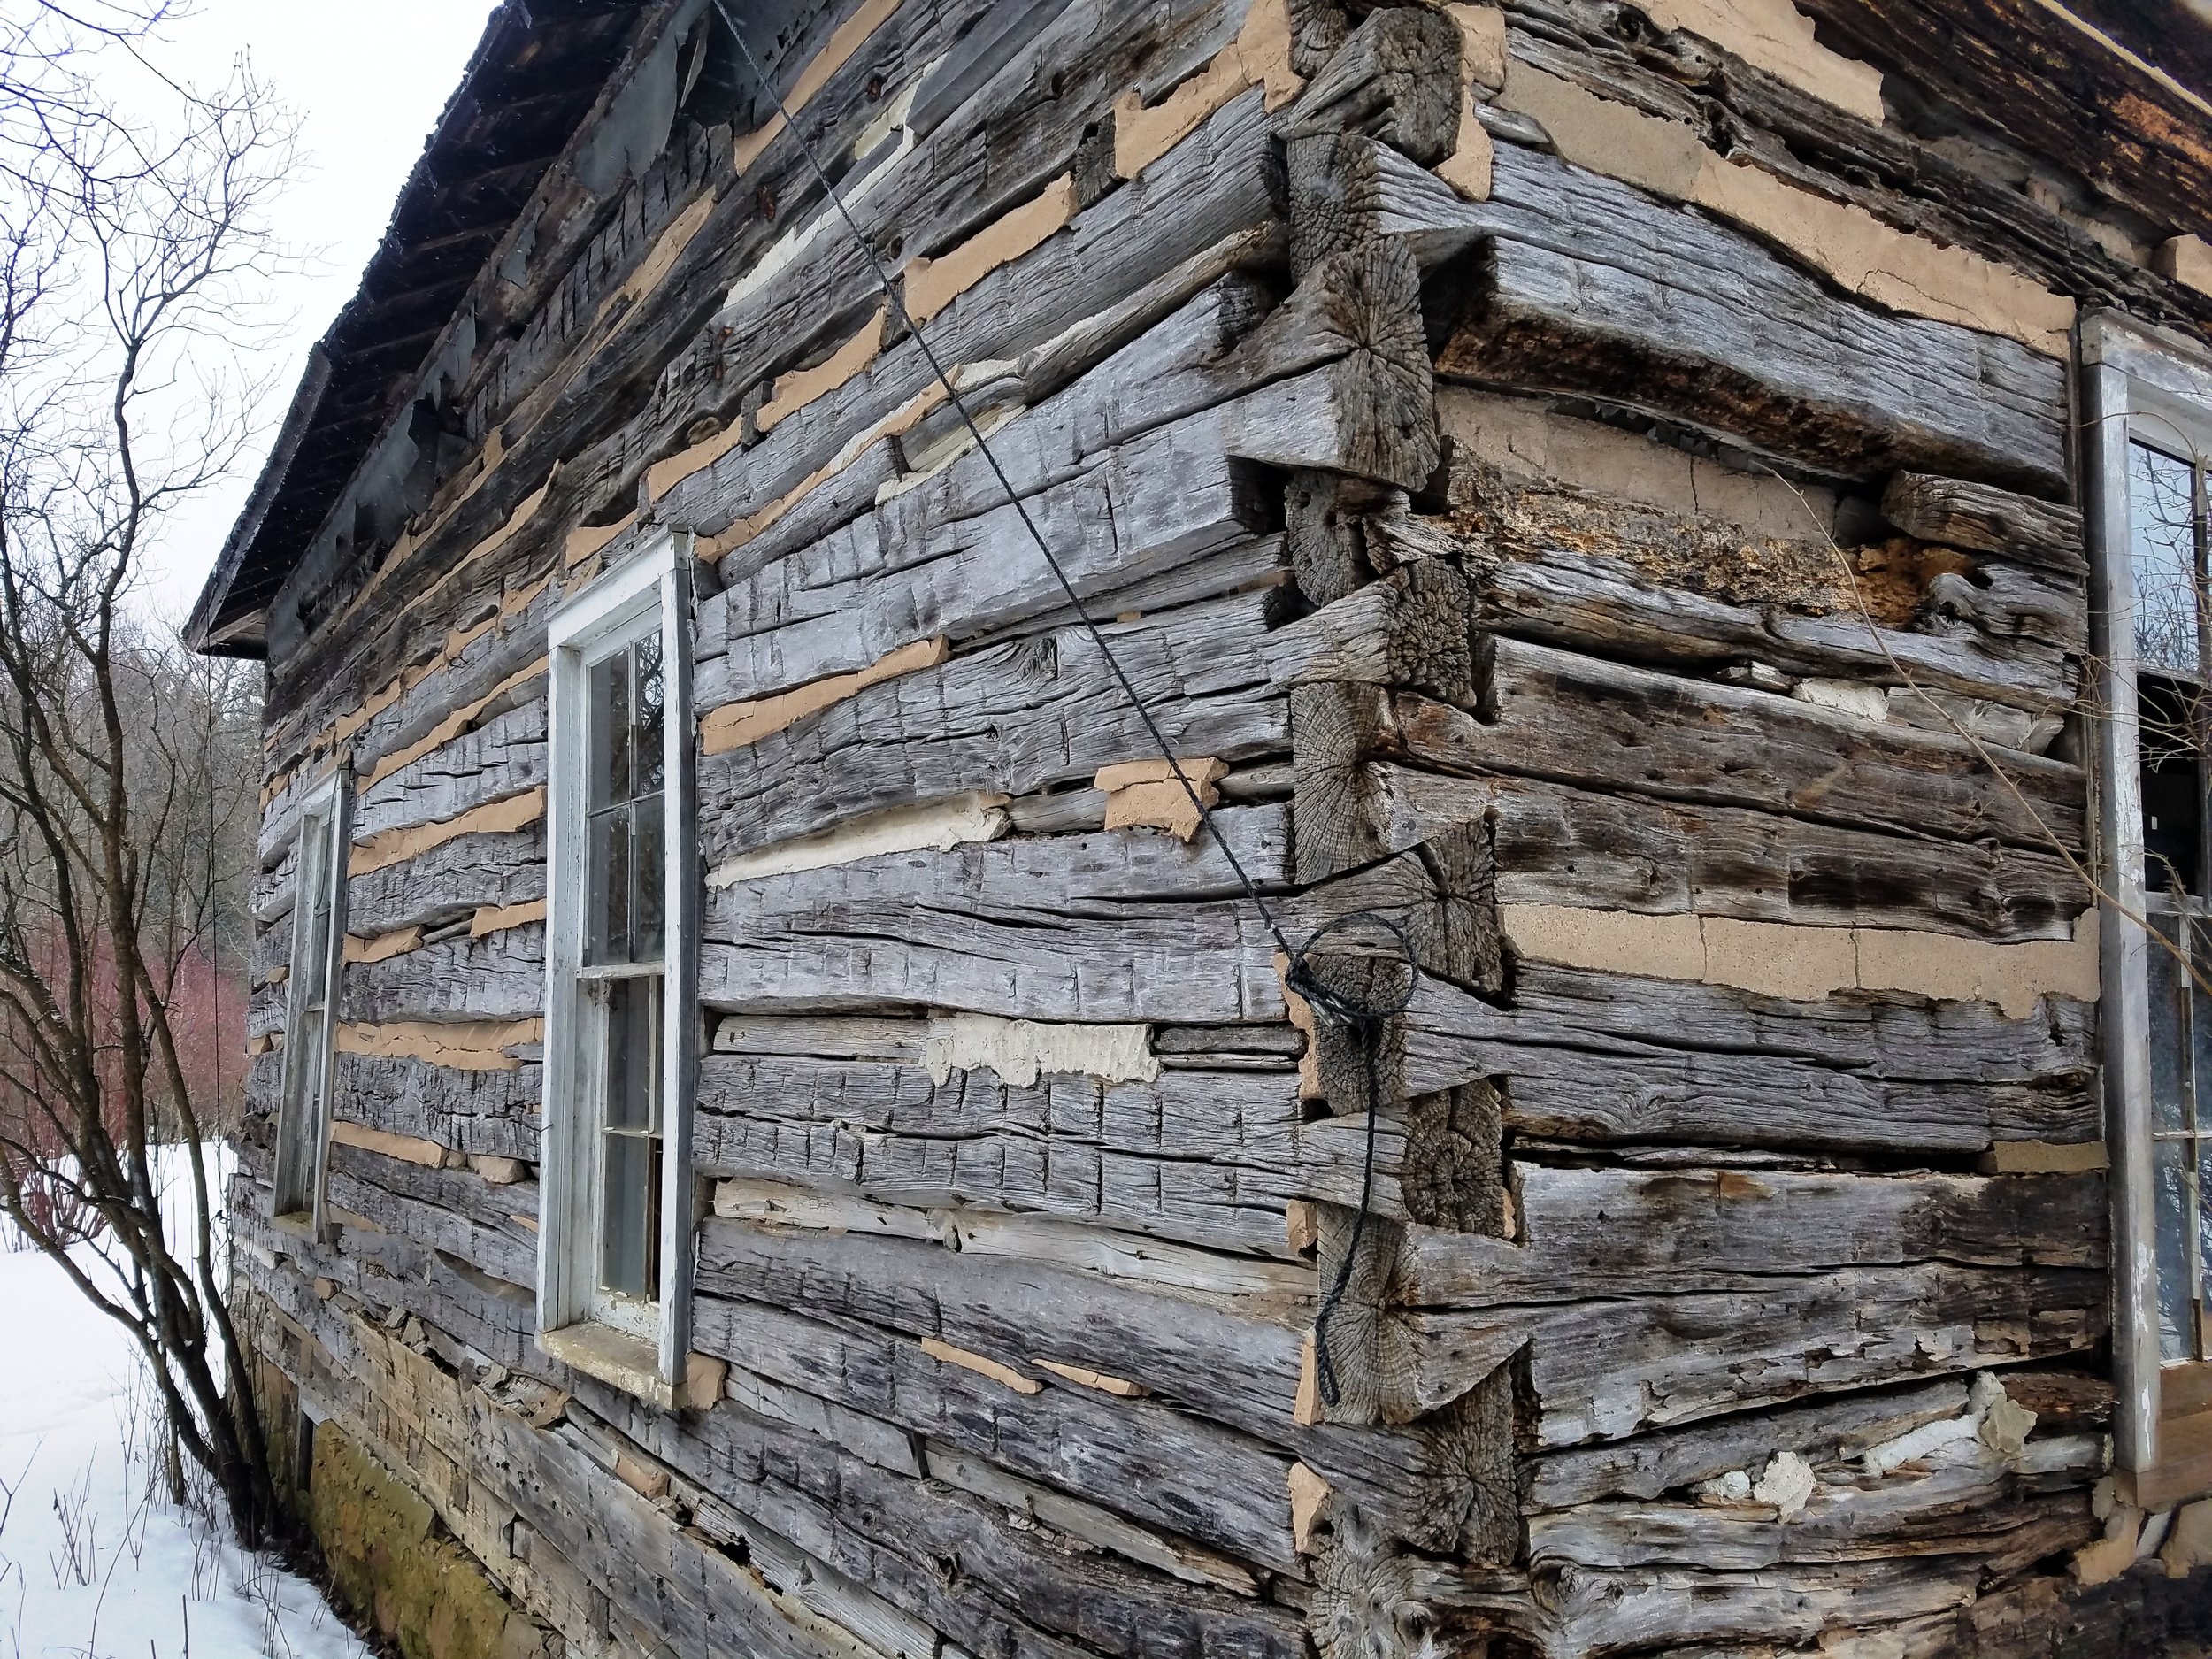  In the late 1850's a French Fur Trader built this log home along the  Wisconsin River and raised his family of five.&nbsp; This structure was  disassembled and numbered log by log.&nbsp; Now, it is rebuilt into an arts  and crafts center as part of 